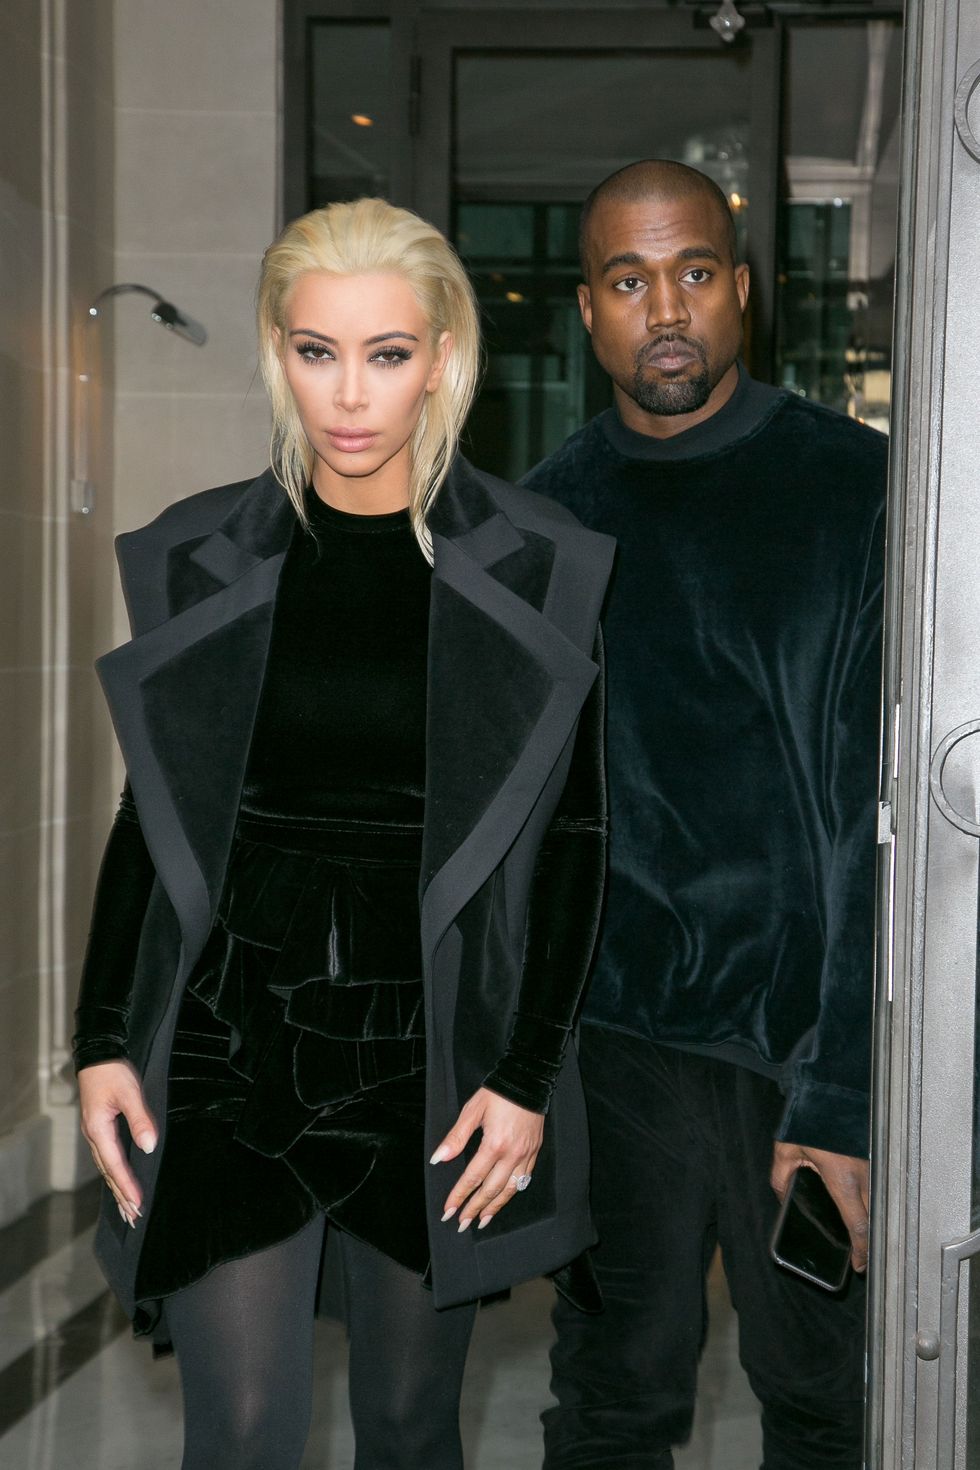 Kim Kardashian's blonde hair gets its full official unveiling in Paris